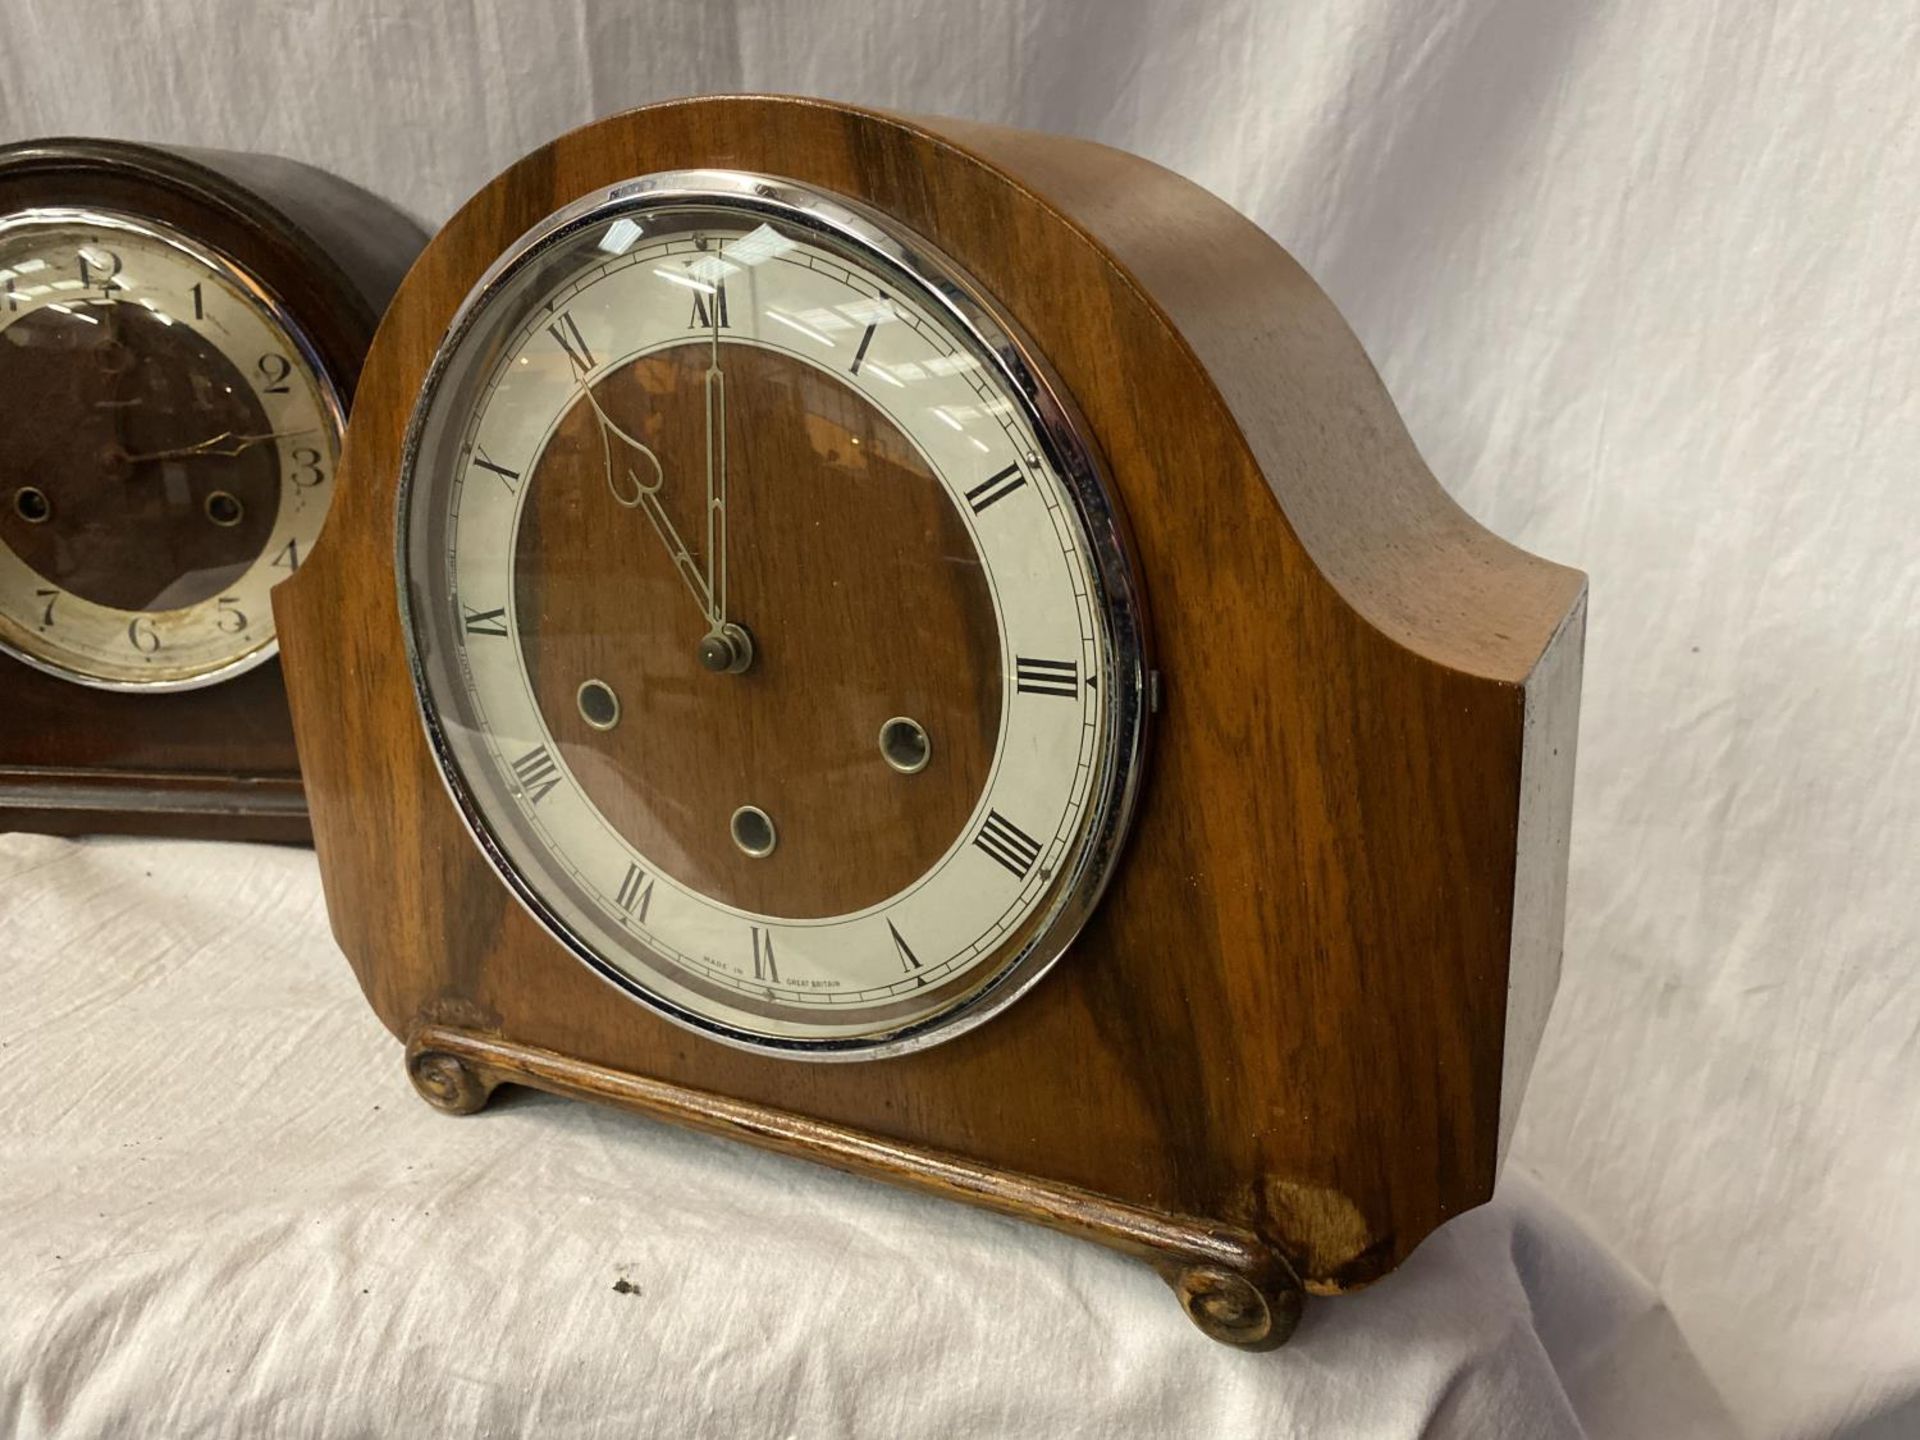 TWO MANTEL CLOCKS, ONE A MAHOGANY NAPOLEON HAT EXAMPLE AND THE OTHER AN ART DECO STYLE - Image 2 of 8